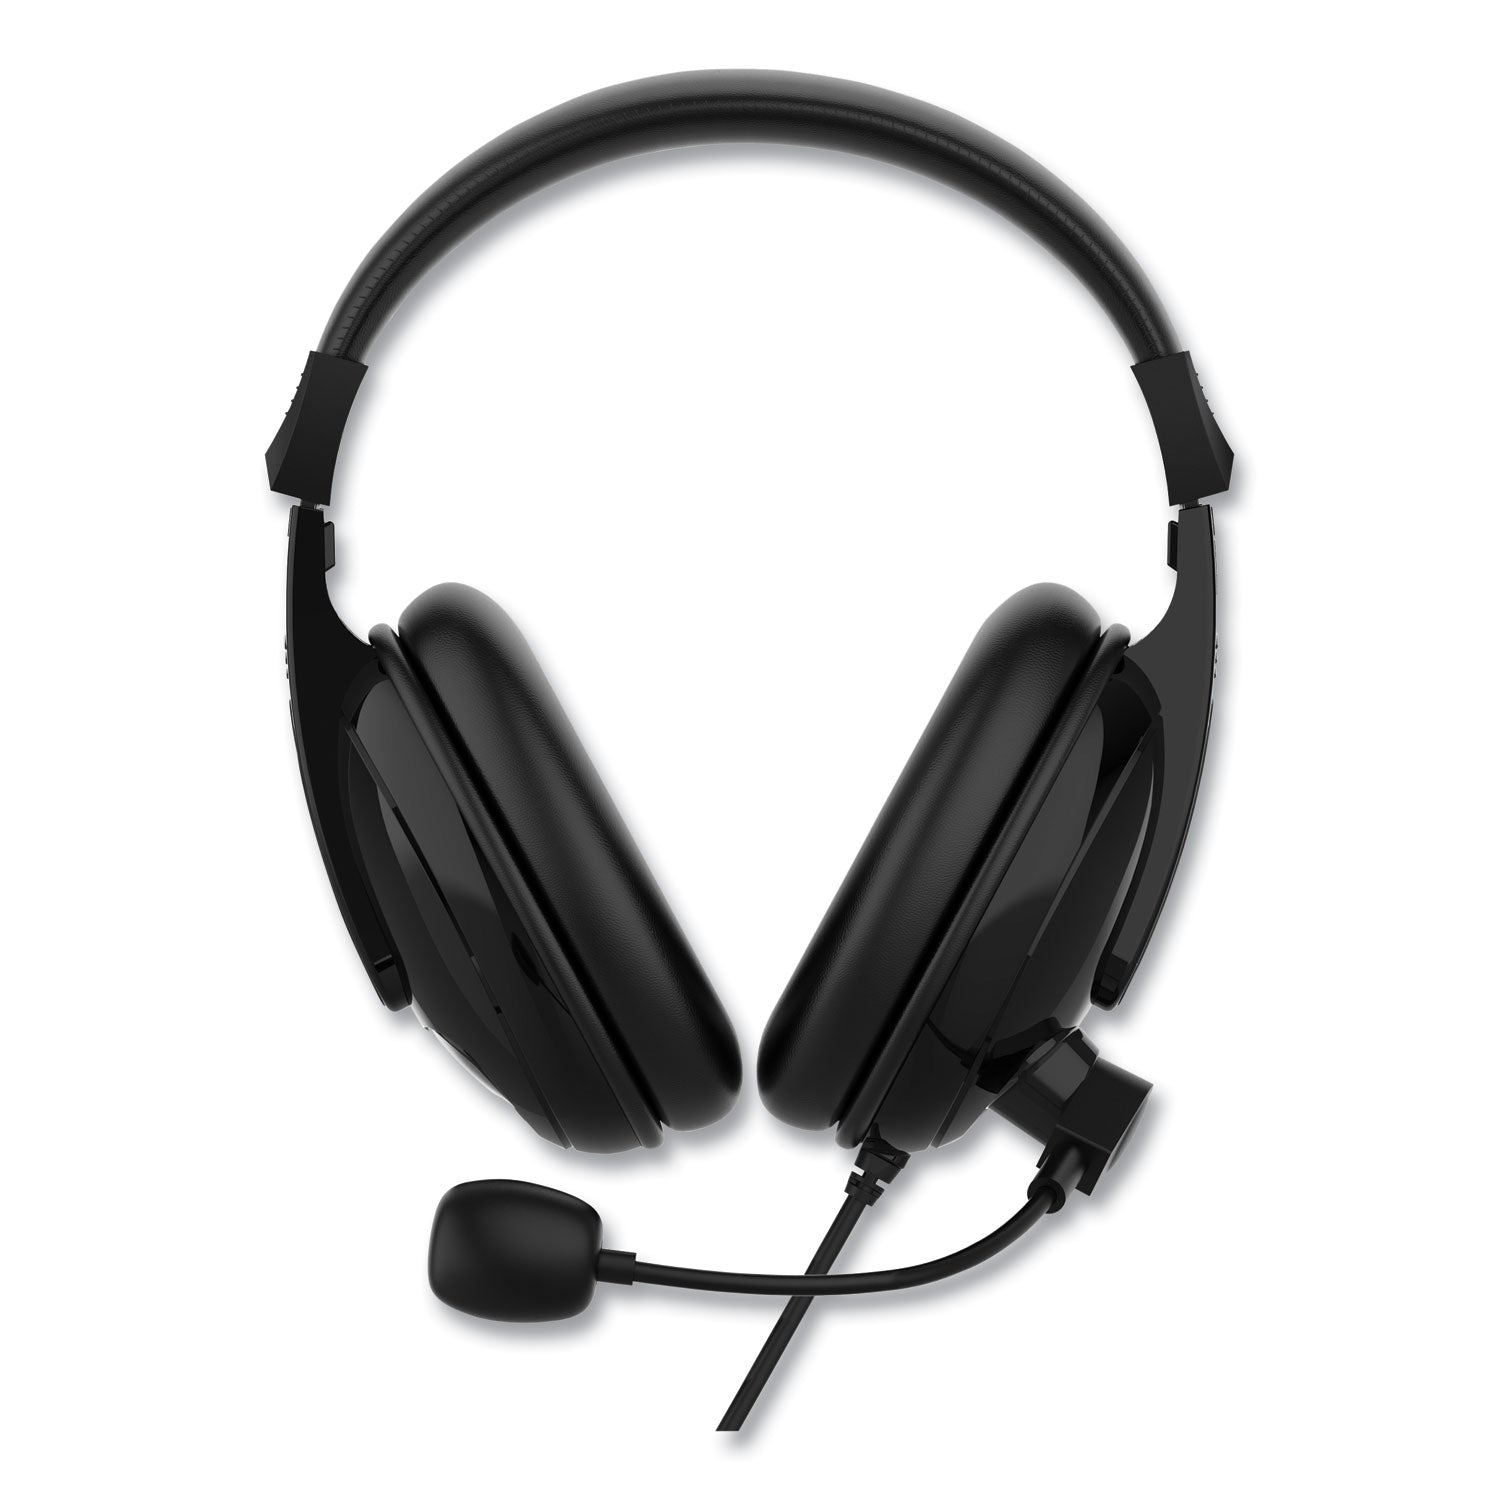 hs3000s-basic-multimedia-stereo-headset-with-microphone_mhshs3000s - 1